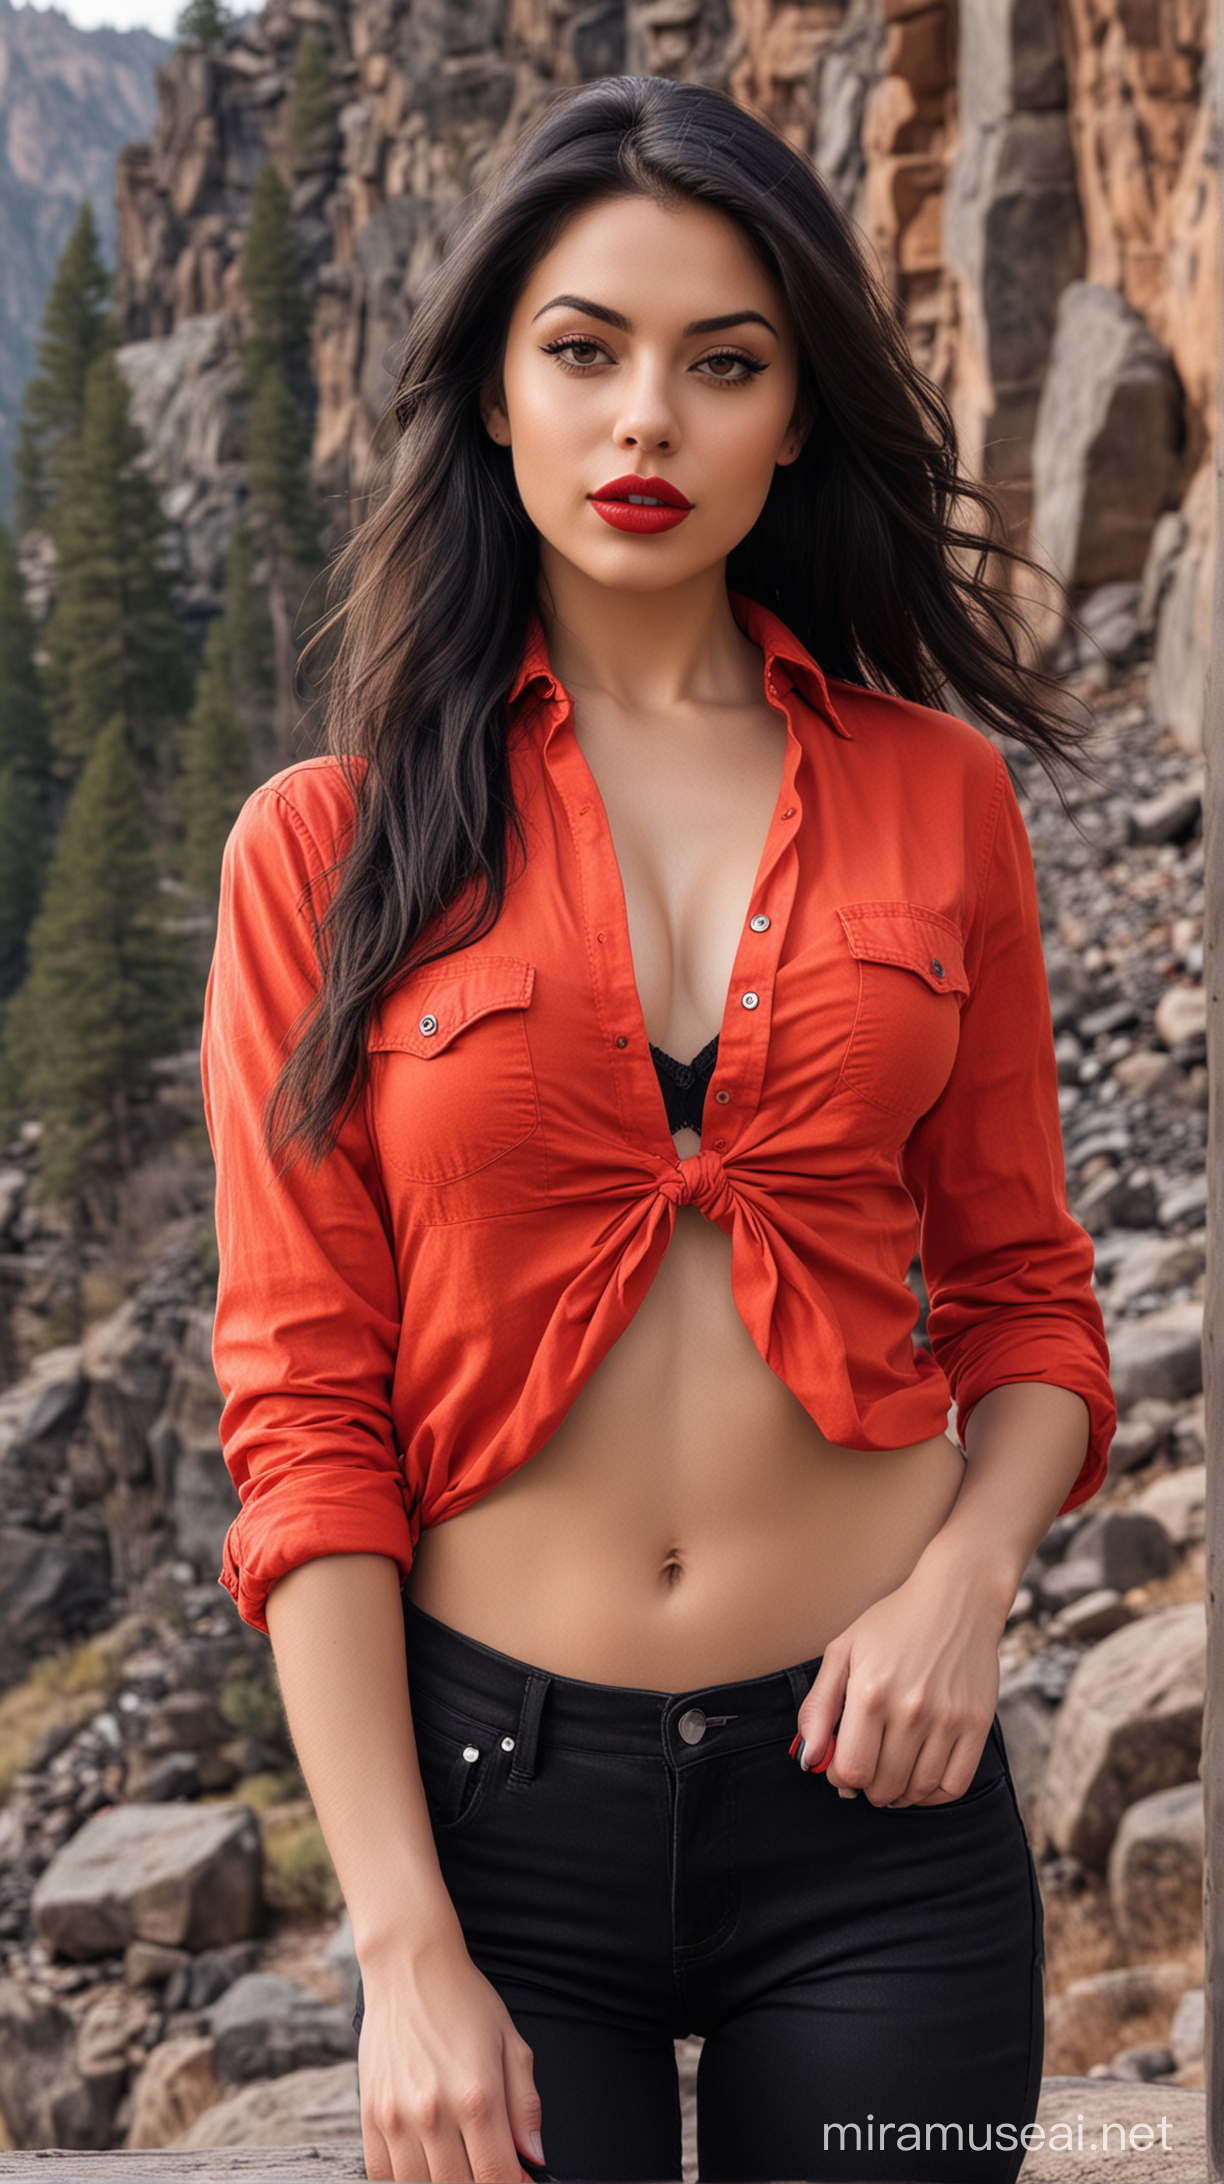 Stunning USA Girl with Open Black Hair Red Lipstick and Chic Fashion in Rocky Mountain Scenery